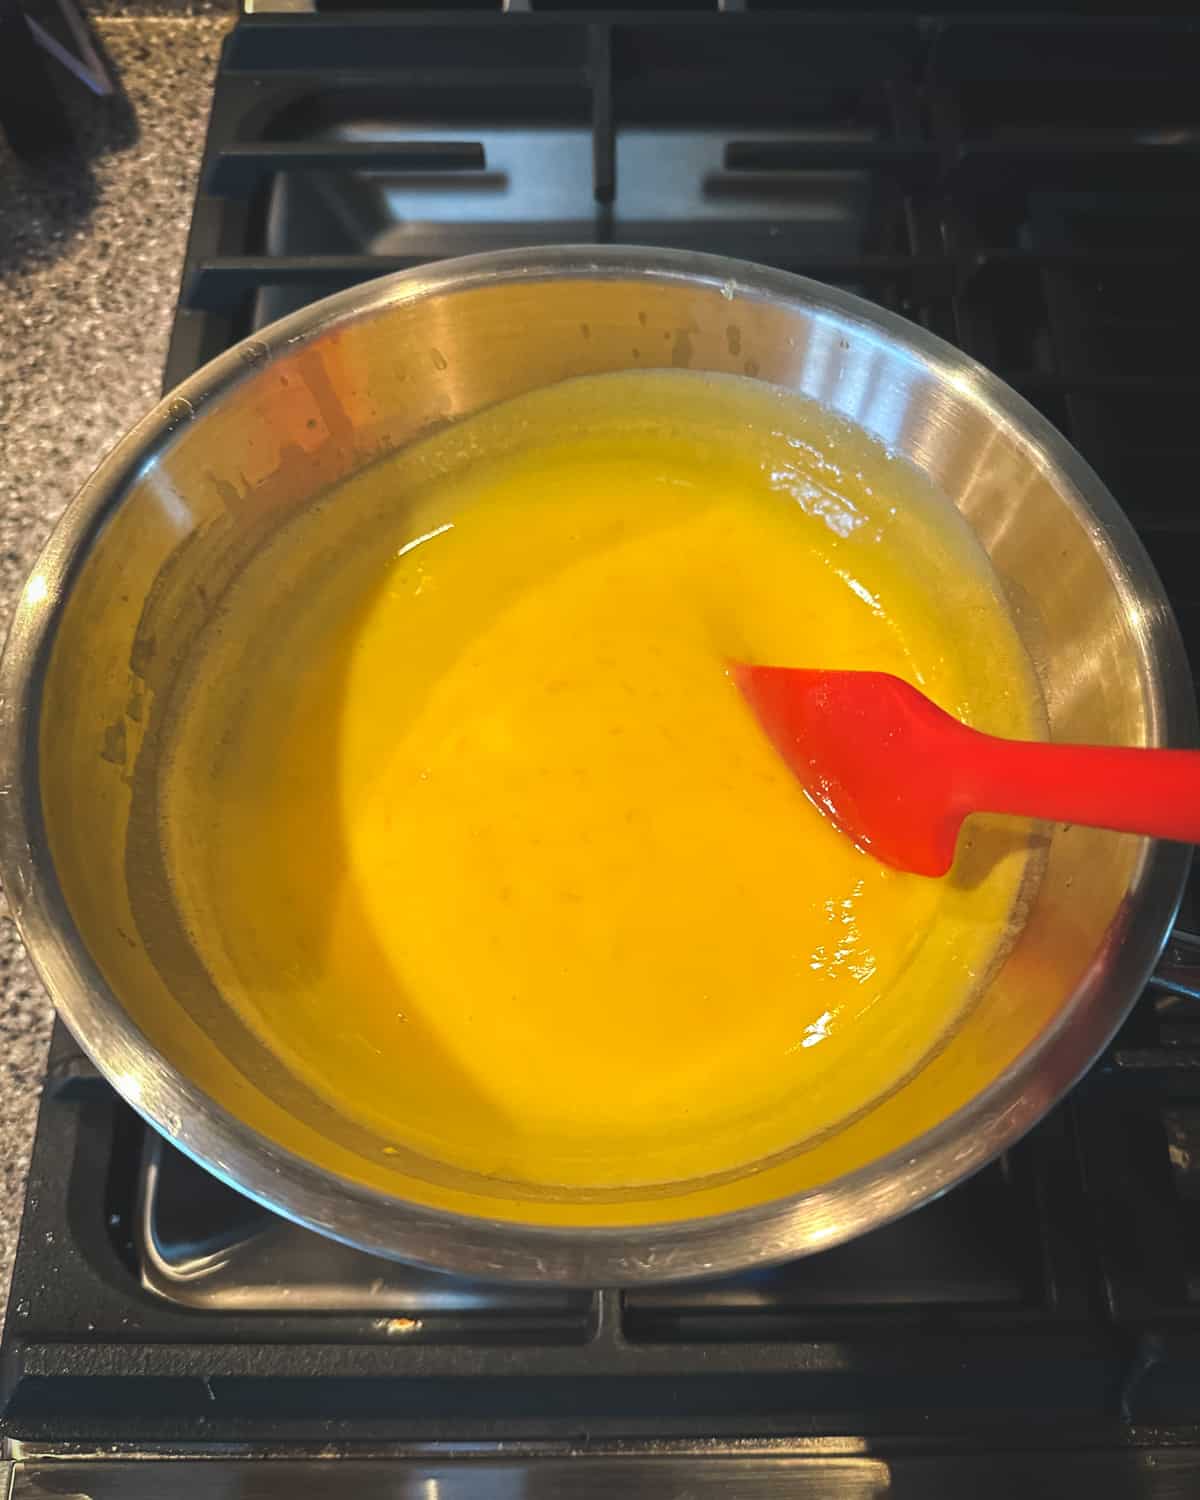 Orange curd thickening in the double boiler, stirred with a red spatula. Top view.